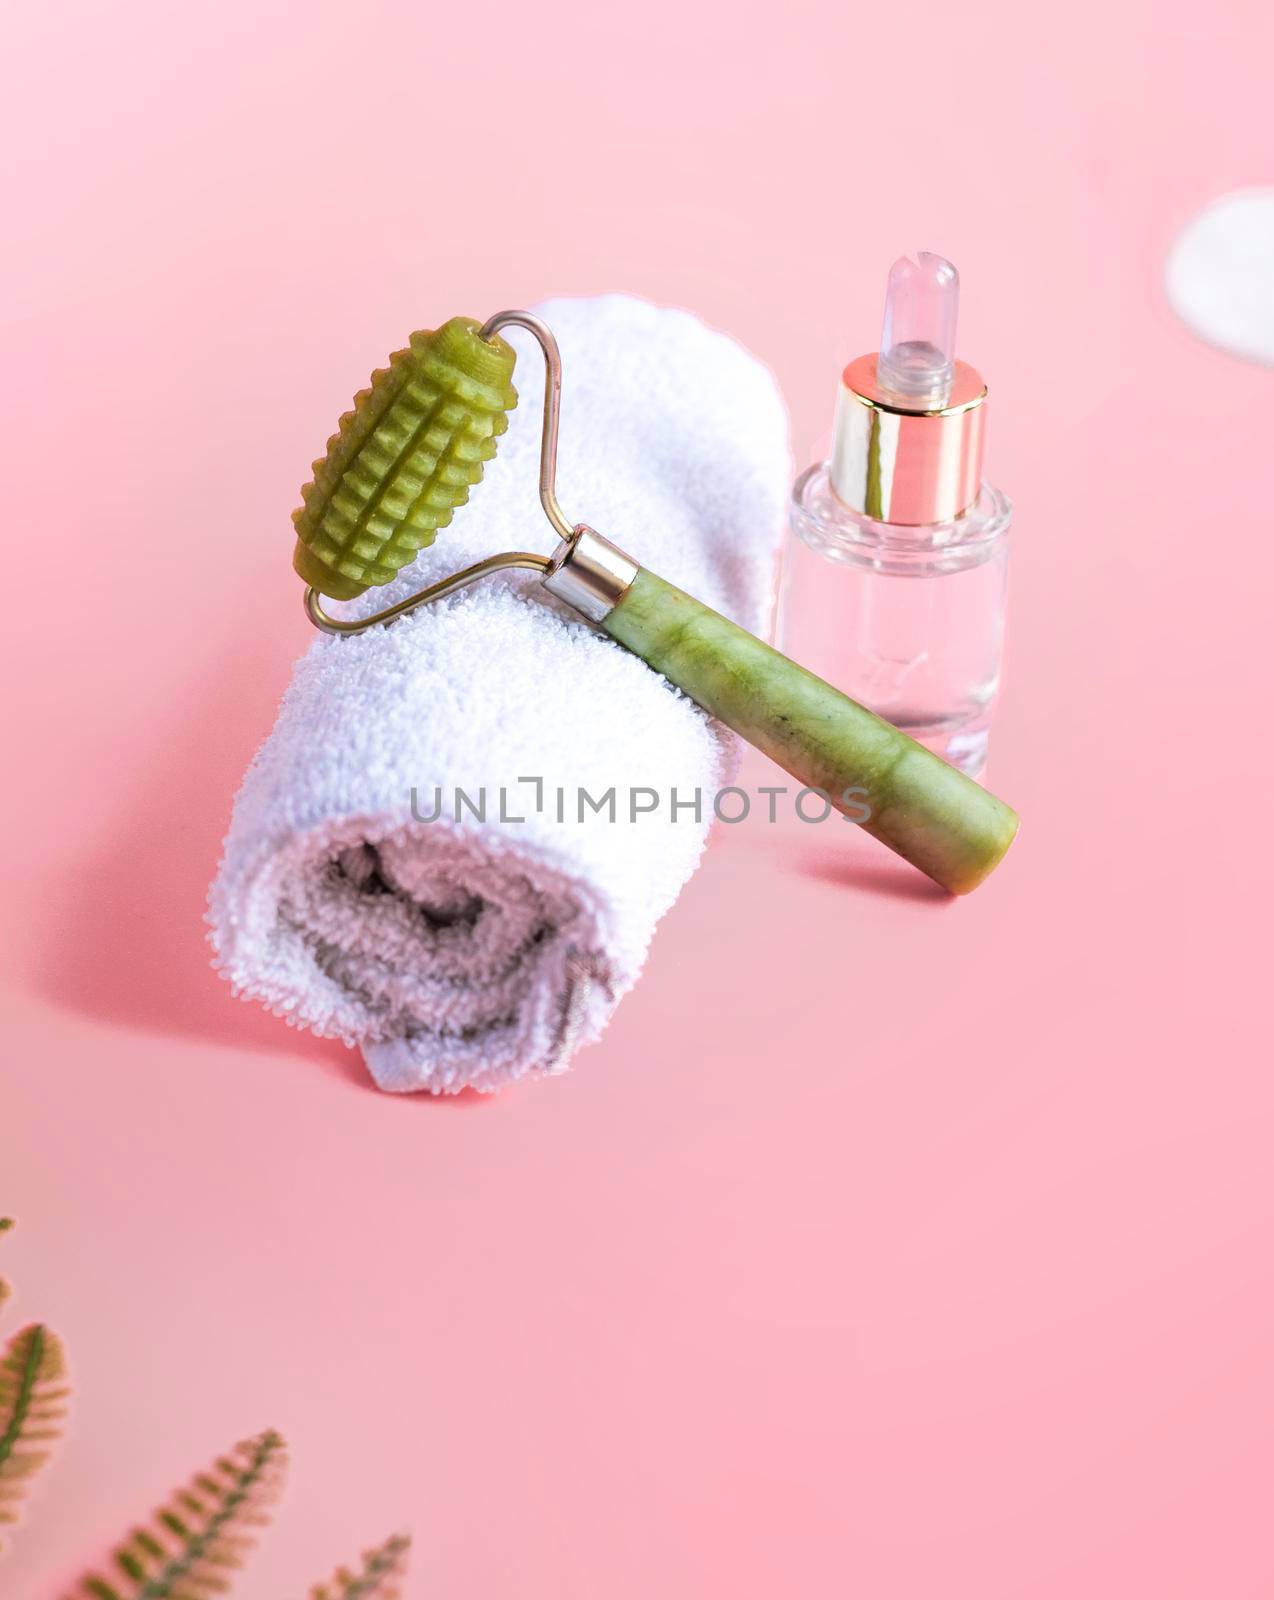 Jade Roller to Eliminate Eye Puffiness, Wrinkles and Relax Muscles. Jade Stone Face Massager, Neck, Skin Care Routine. texture massager massager with spikes for face in green color on pink background